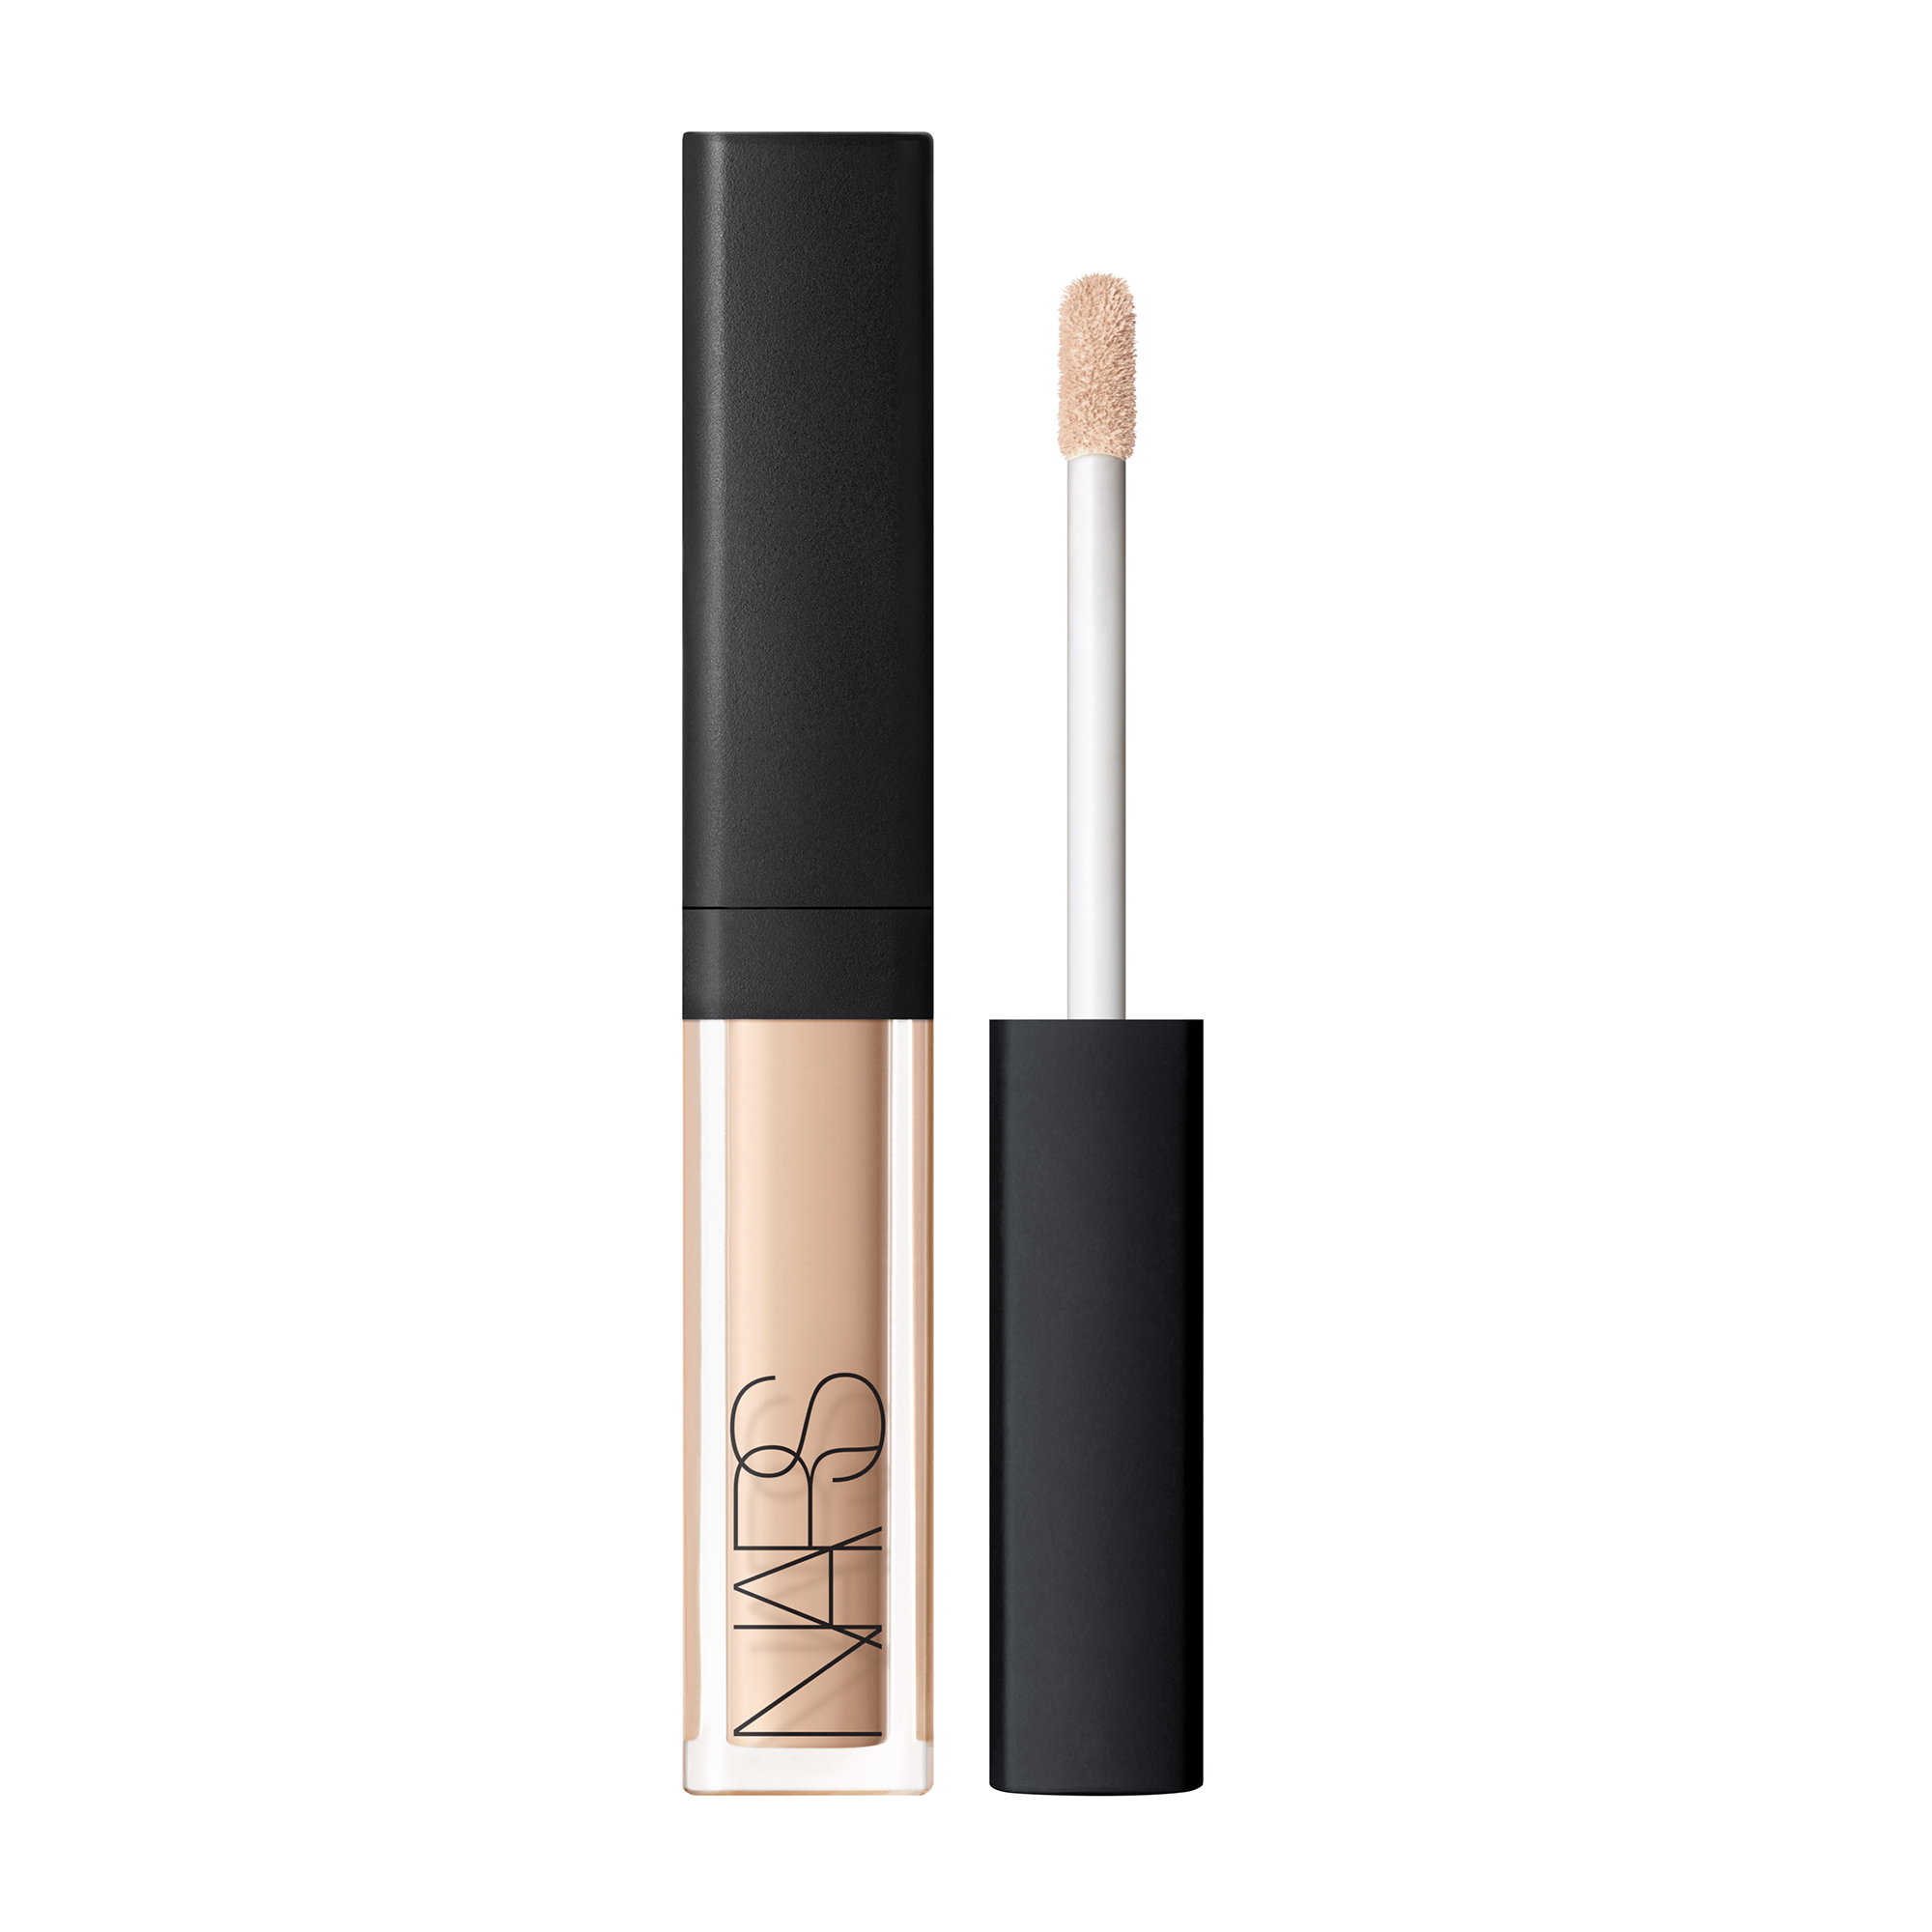 Nars Radiant Creamy Concealer Travel Size | Space NK